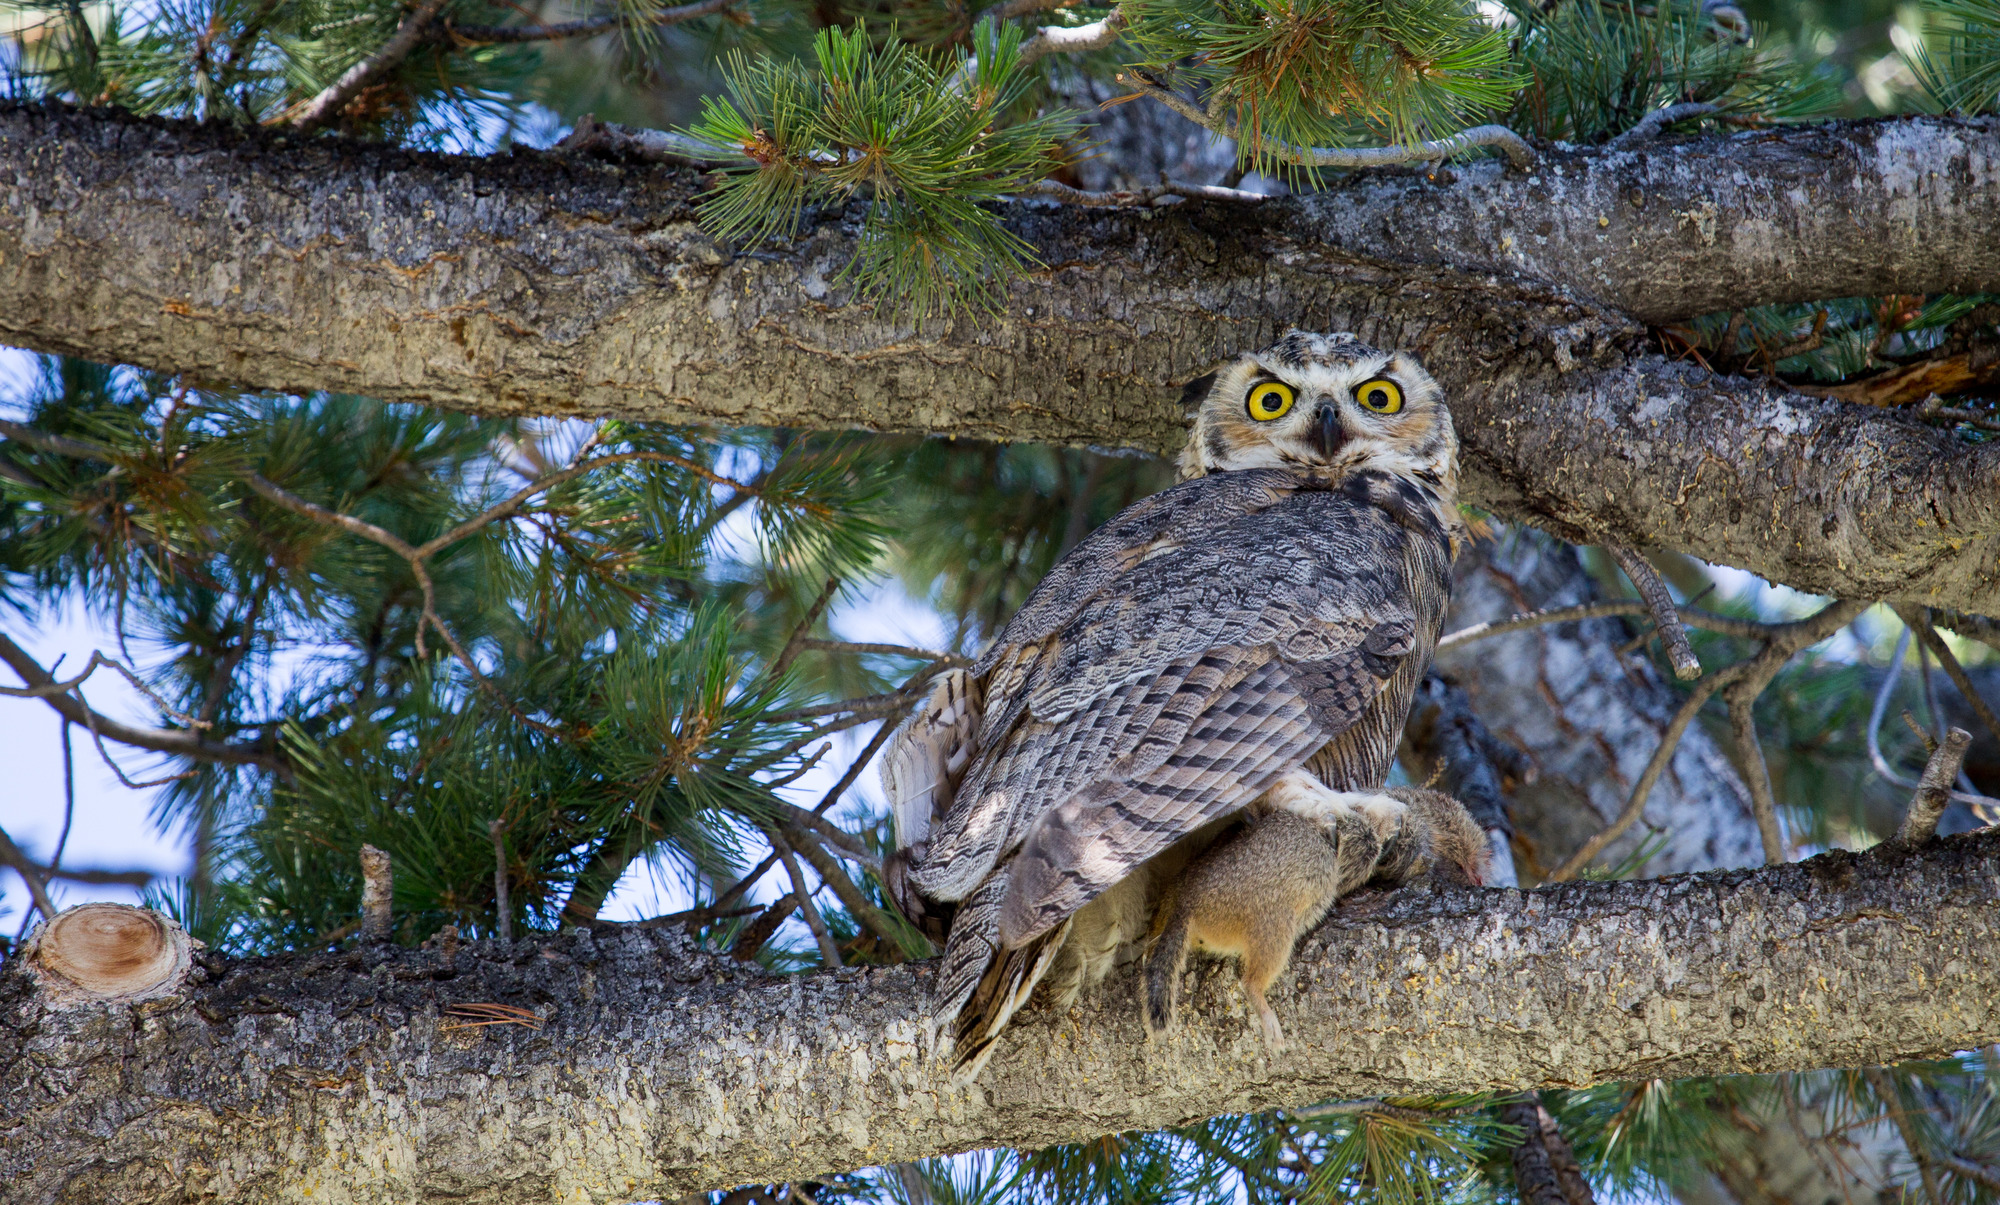 Great horned owl perches on conifer limb with a ground squirrel in its talons.